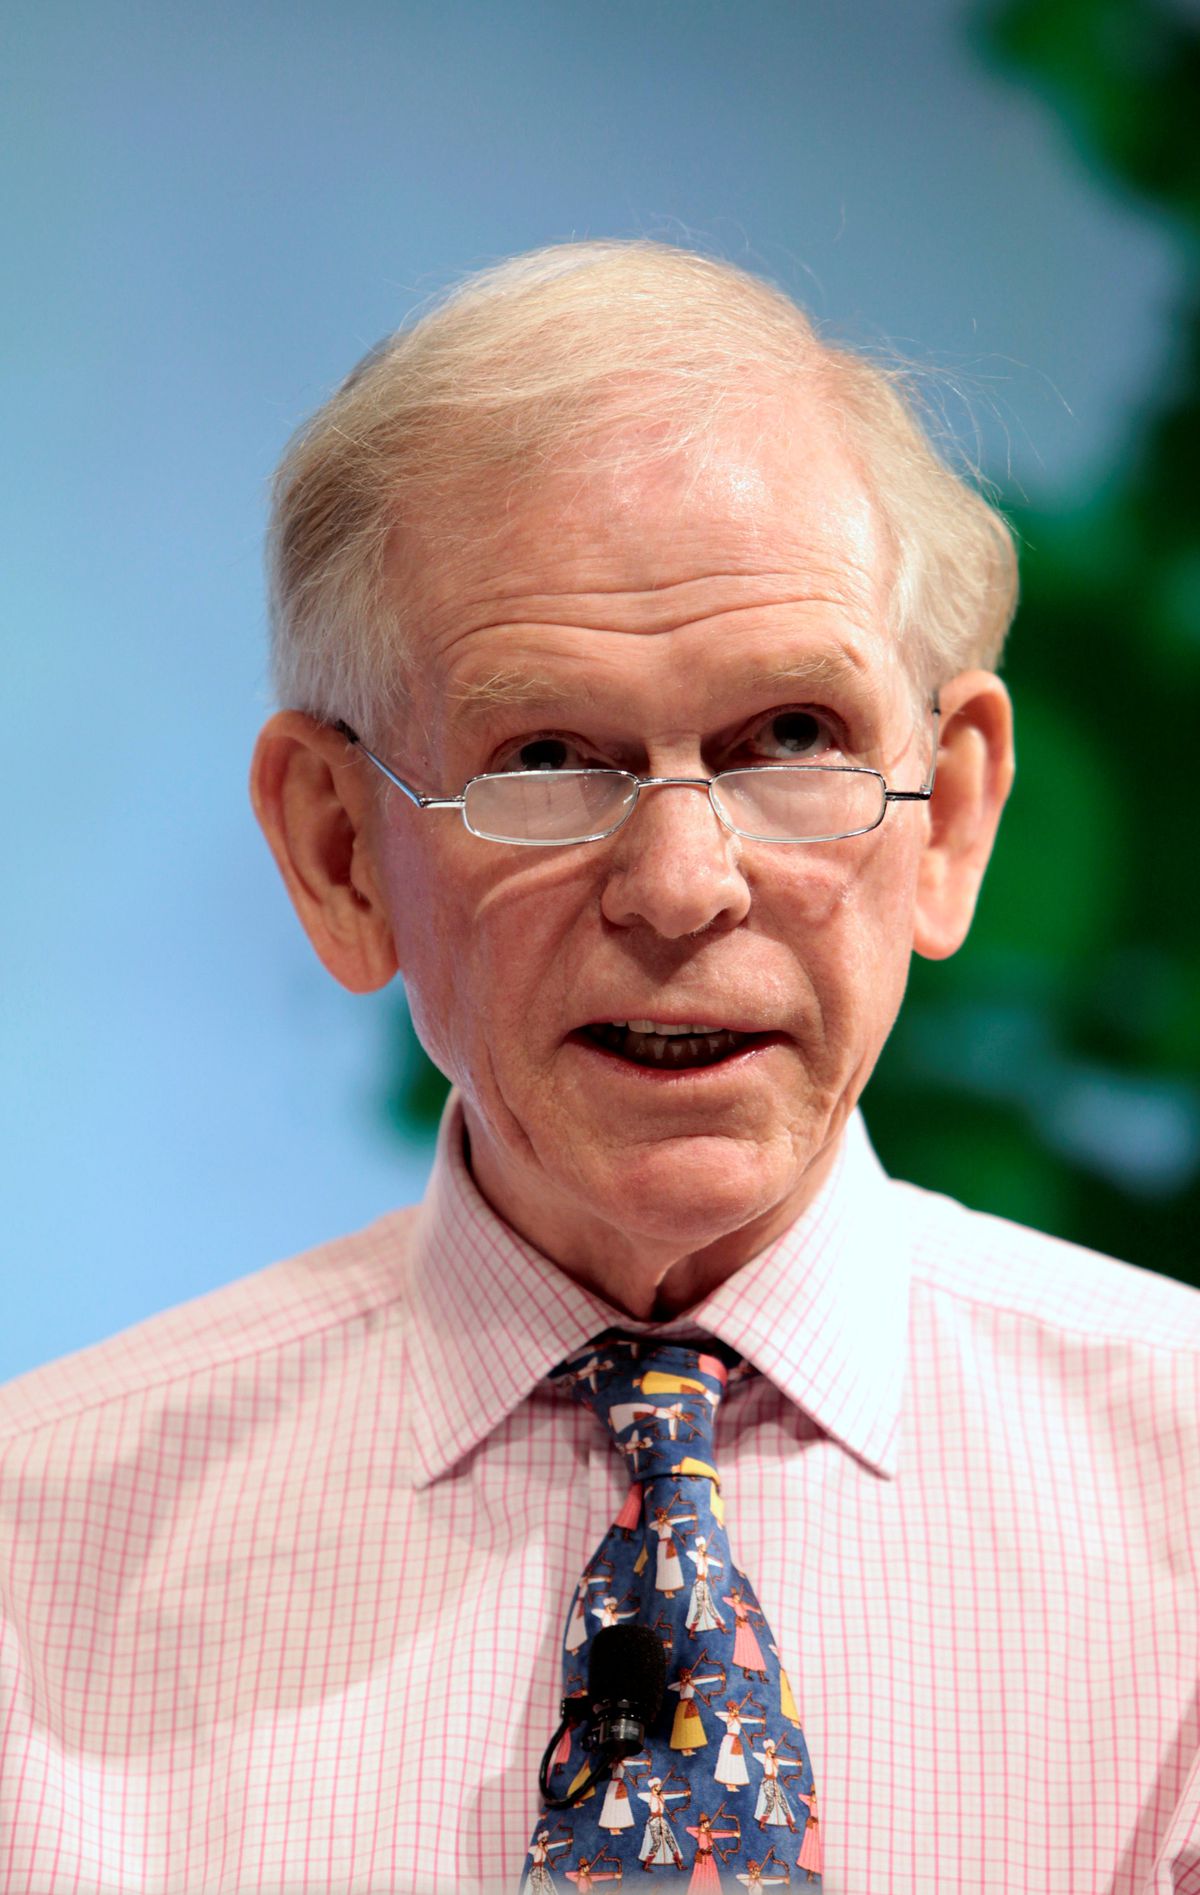  Bubbles, bubbles everywhere: Jeremy Grantham on the bust ahead